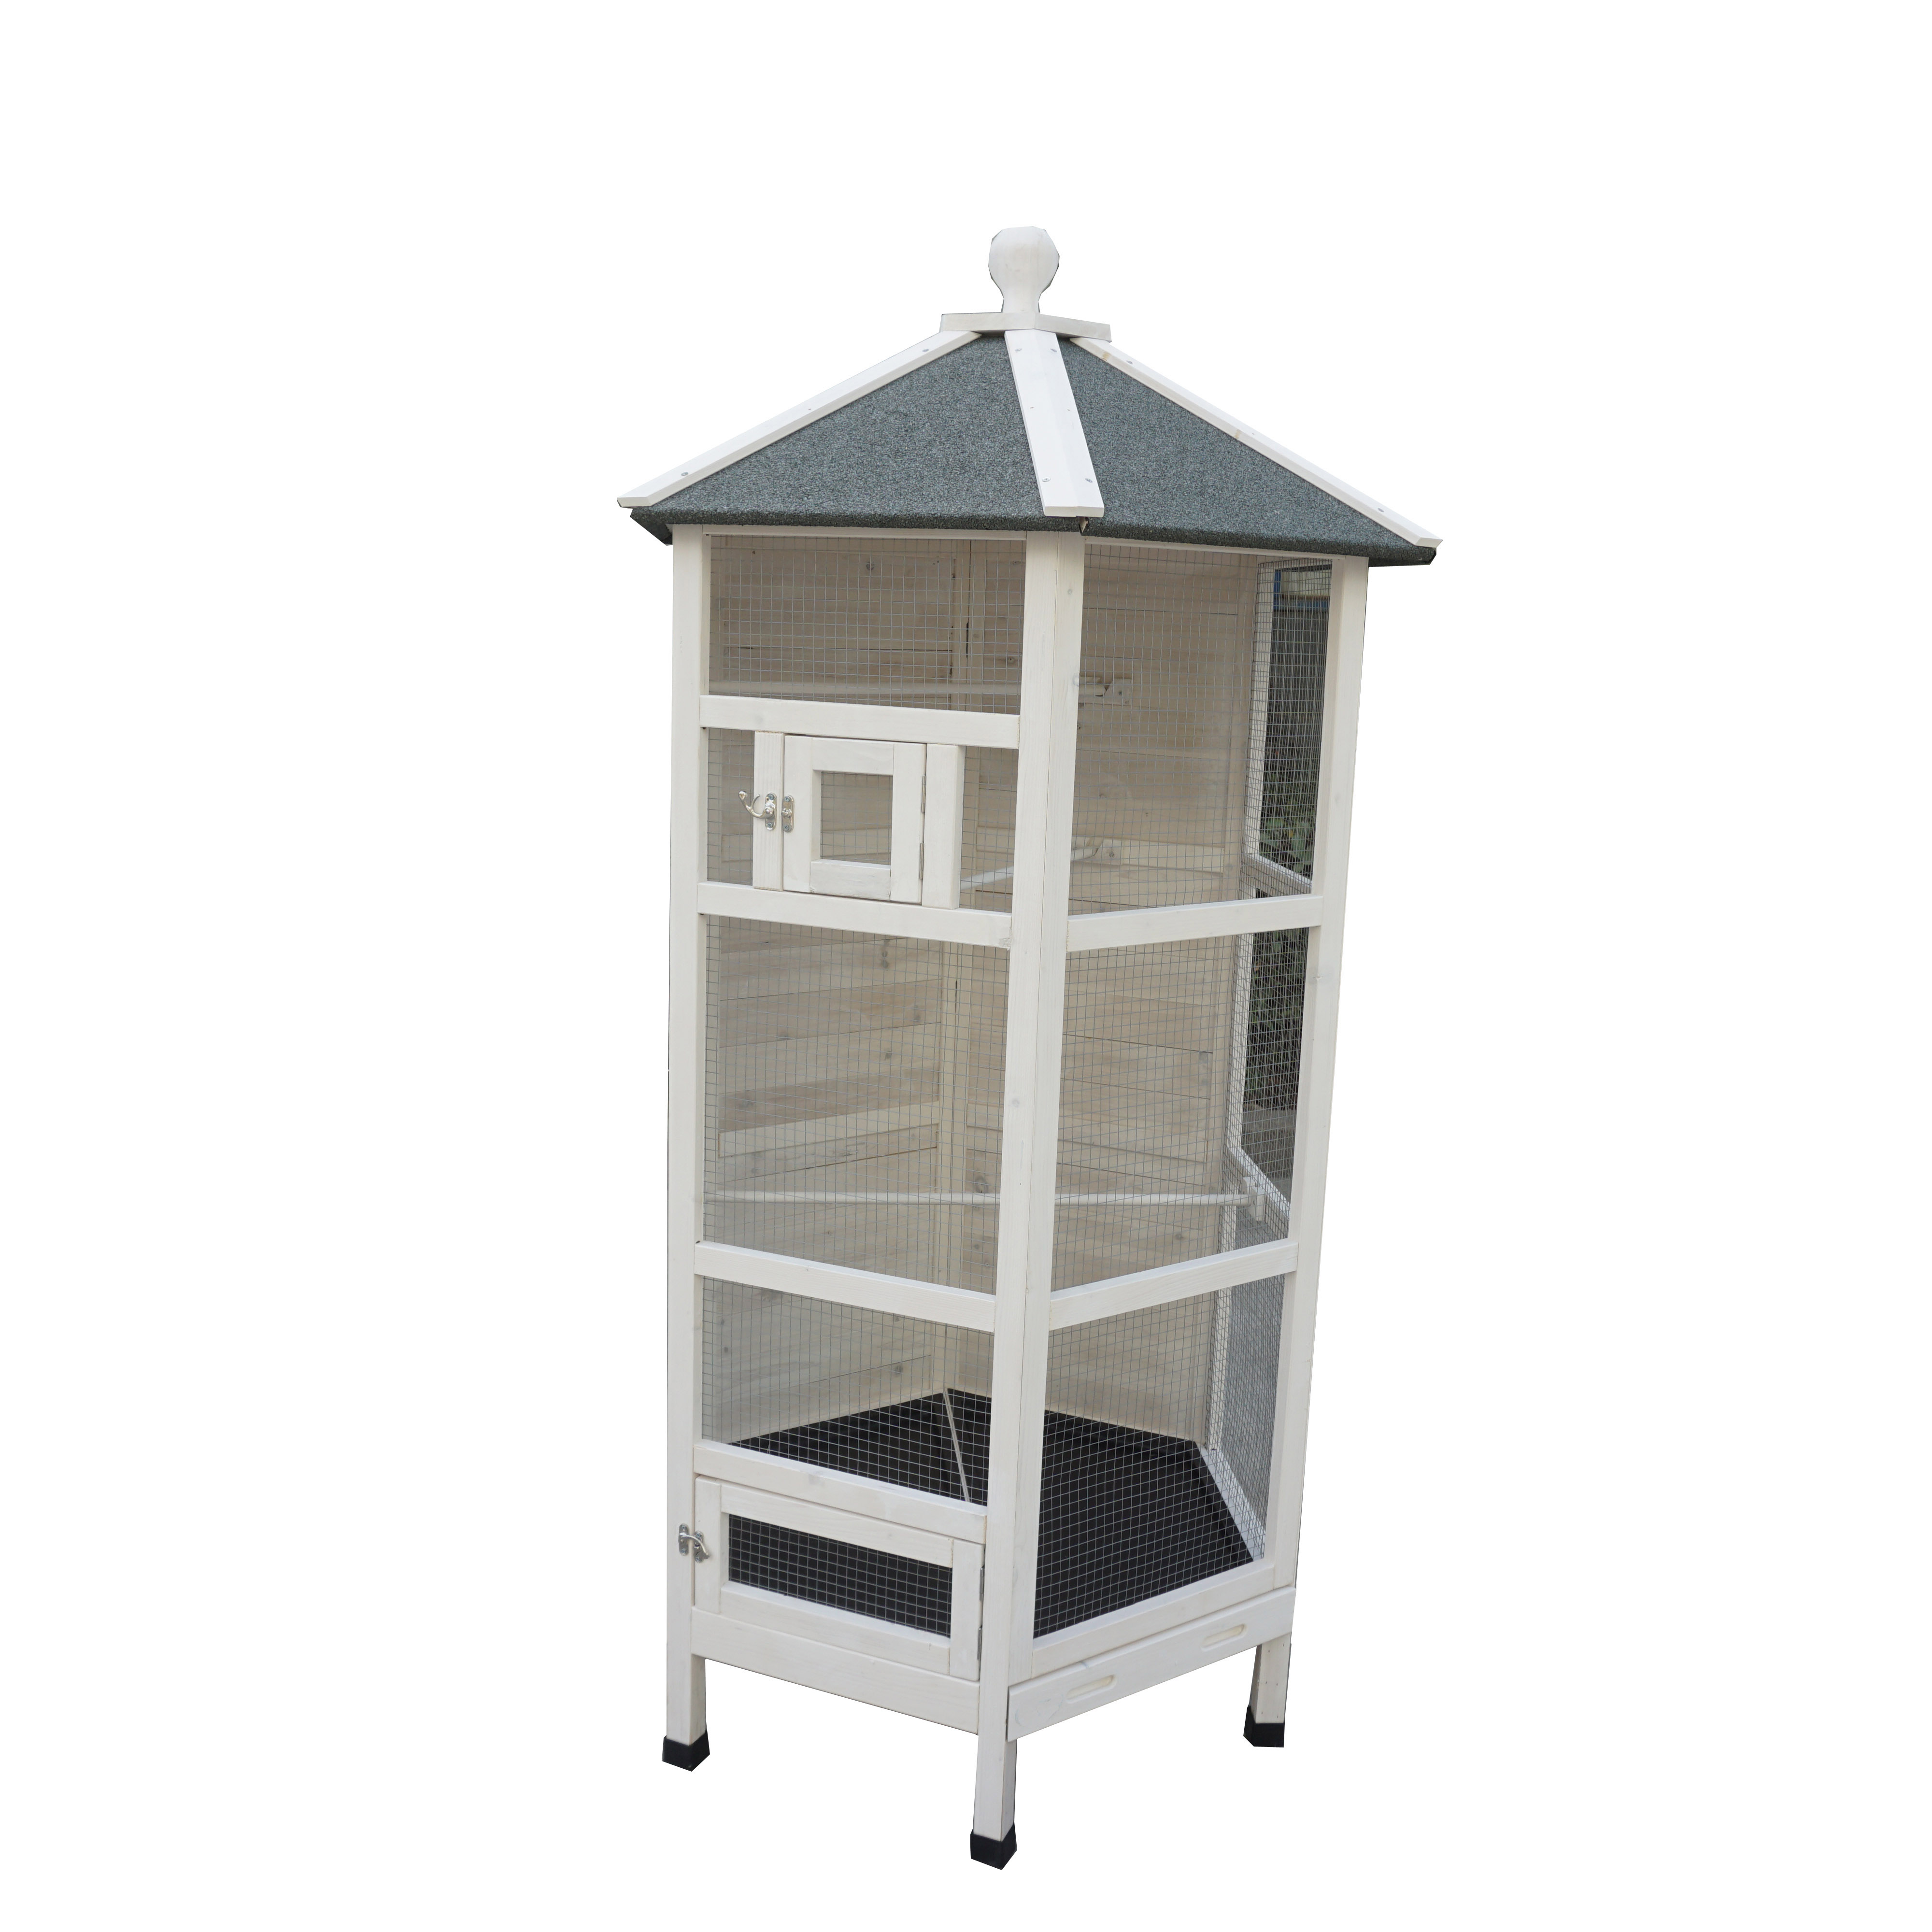 Hexagonal Outdoor Aviary Flight Galvanized wooden bird pigeon breeding cage for sale with Covered Roof